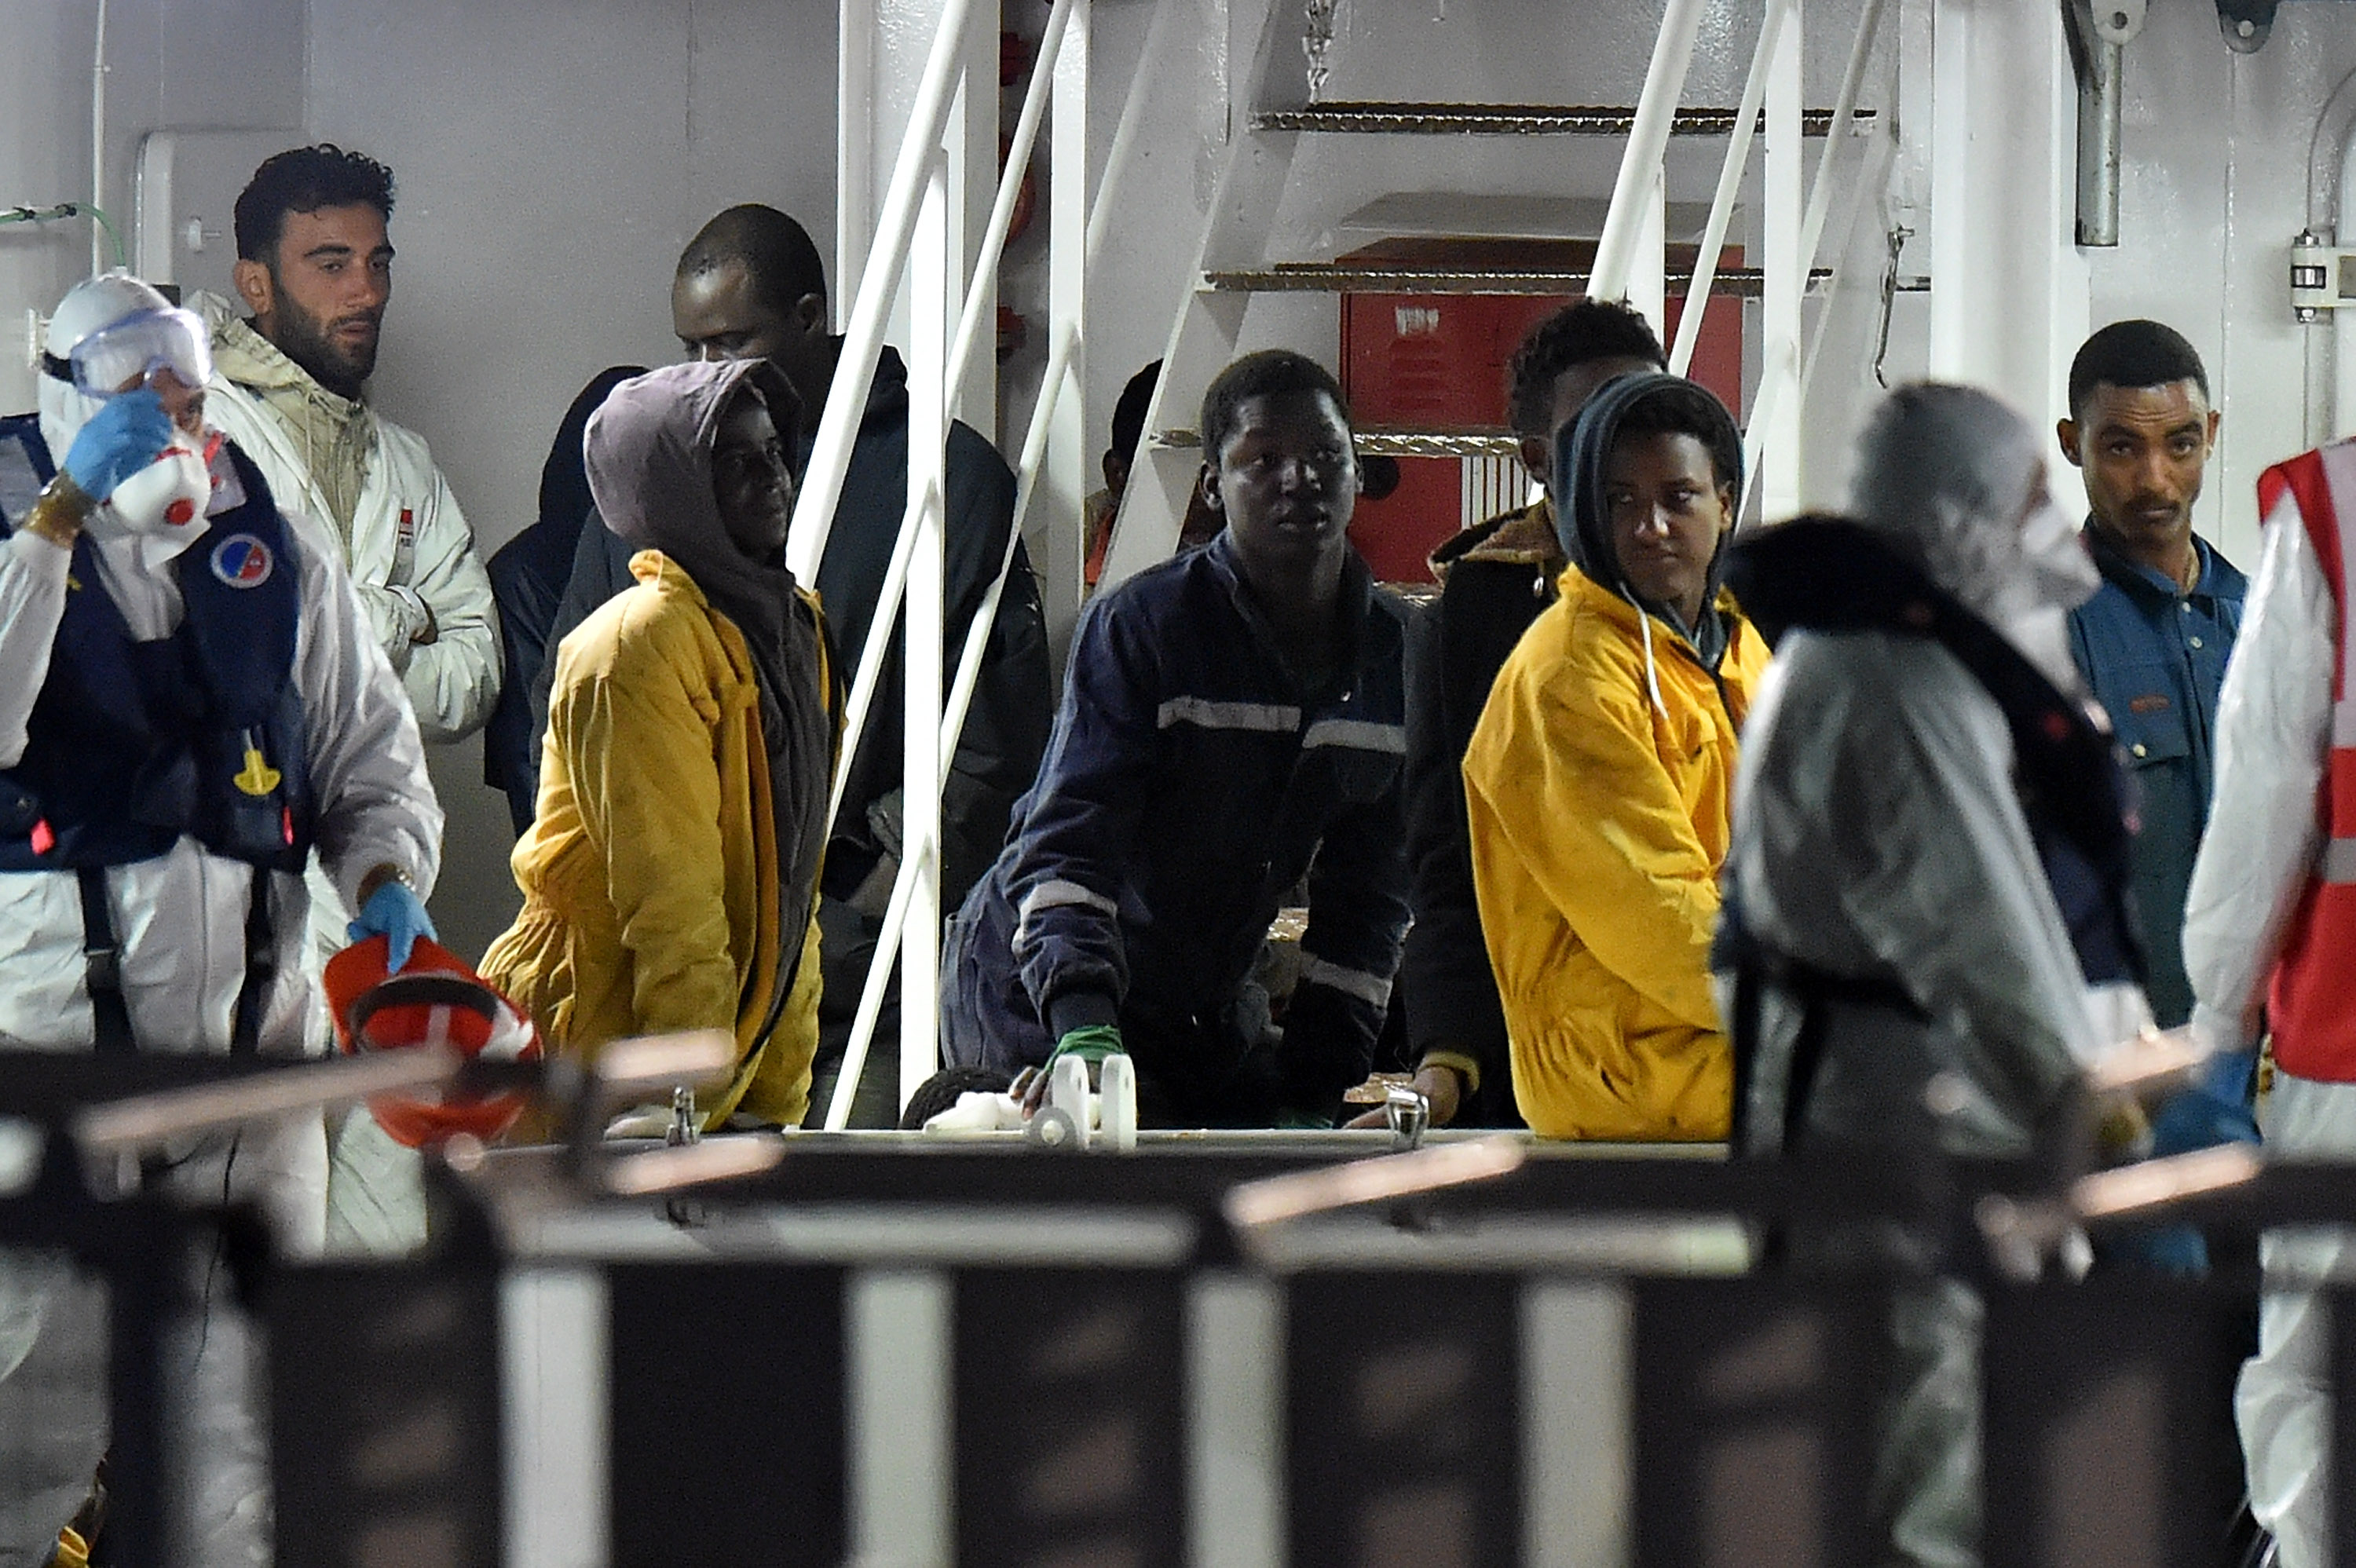 Tunisian skipper Mohammed Ali Malek stands on the deck of the Italian Coast Guard ship Gregretti which is carrying 27 survivors of the migrant shipwreck in the mediterranean, at Catania port on April 20, 2015 in Catania, Italy.  (Getty)